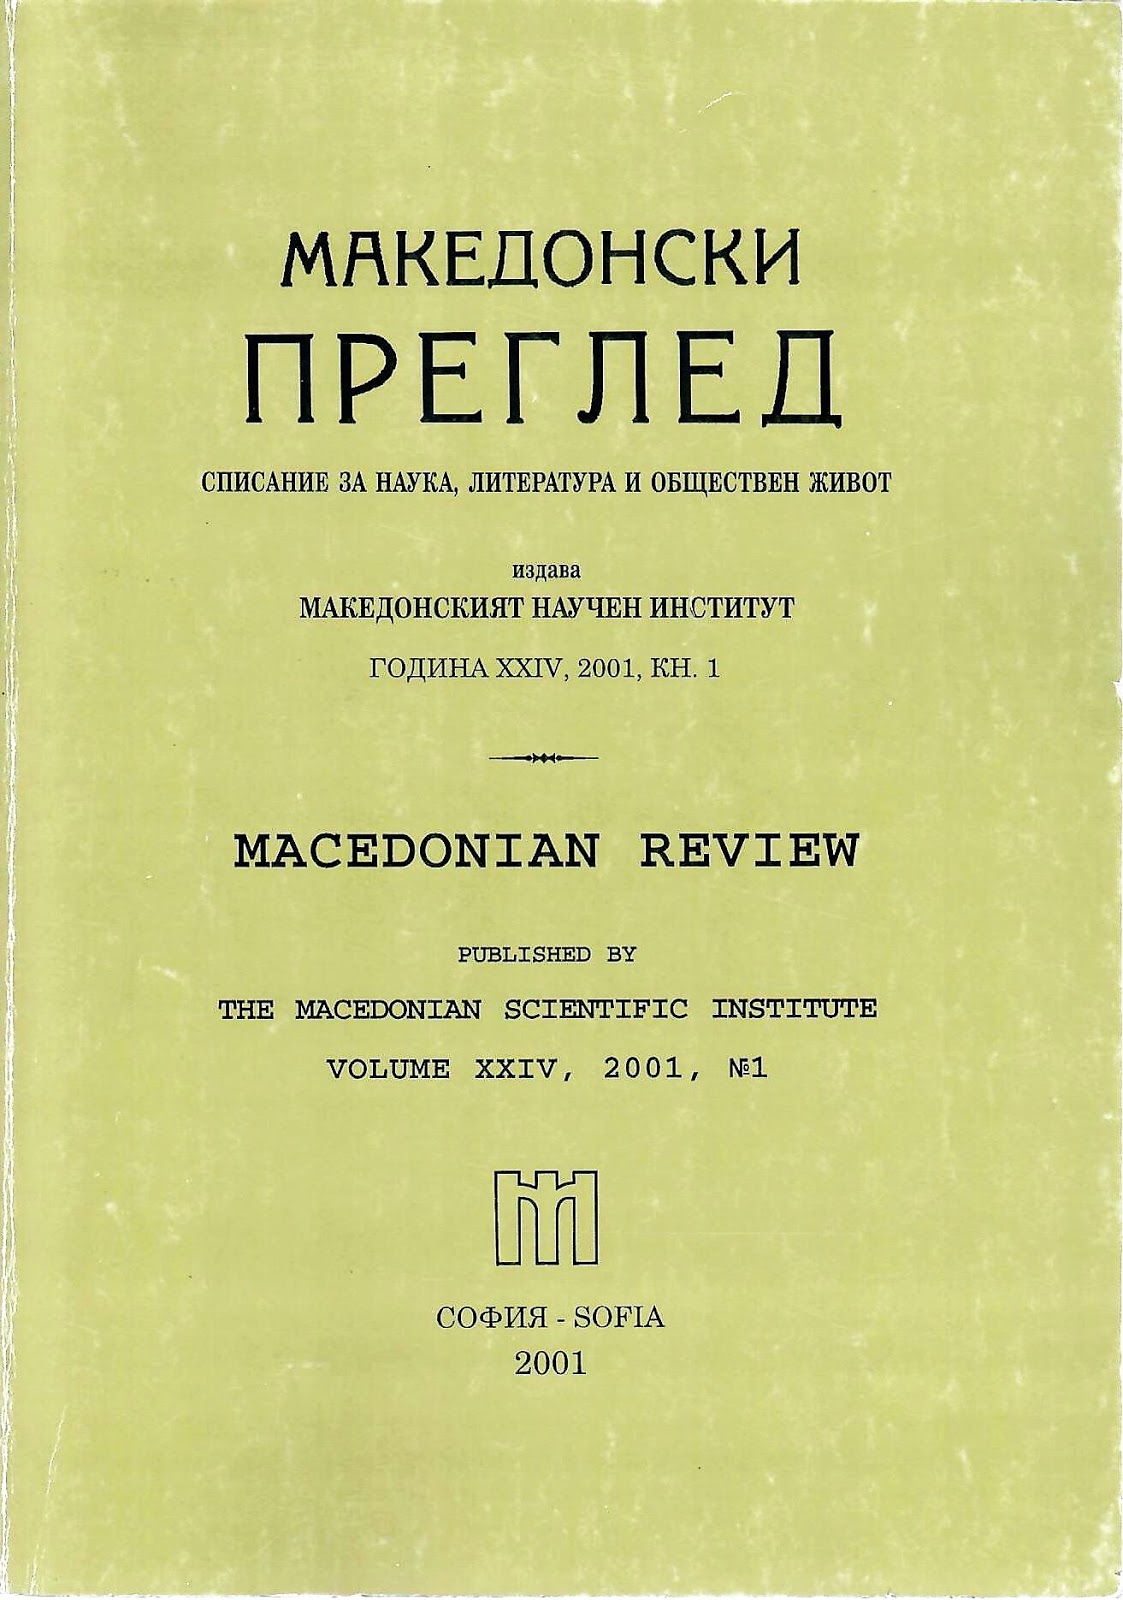 Heteronyms having the meaning of woodpecker in Bulgarian dialects in Macedonia Cover Image